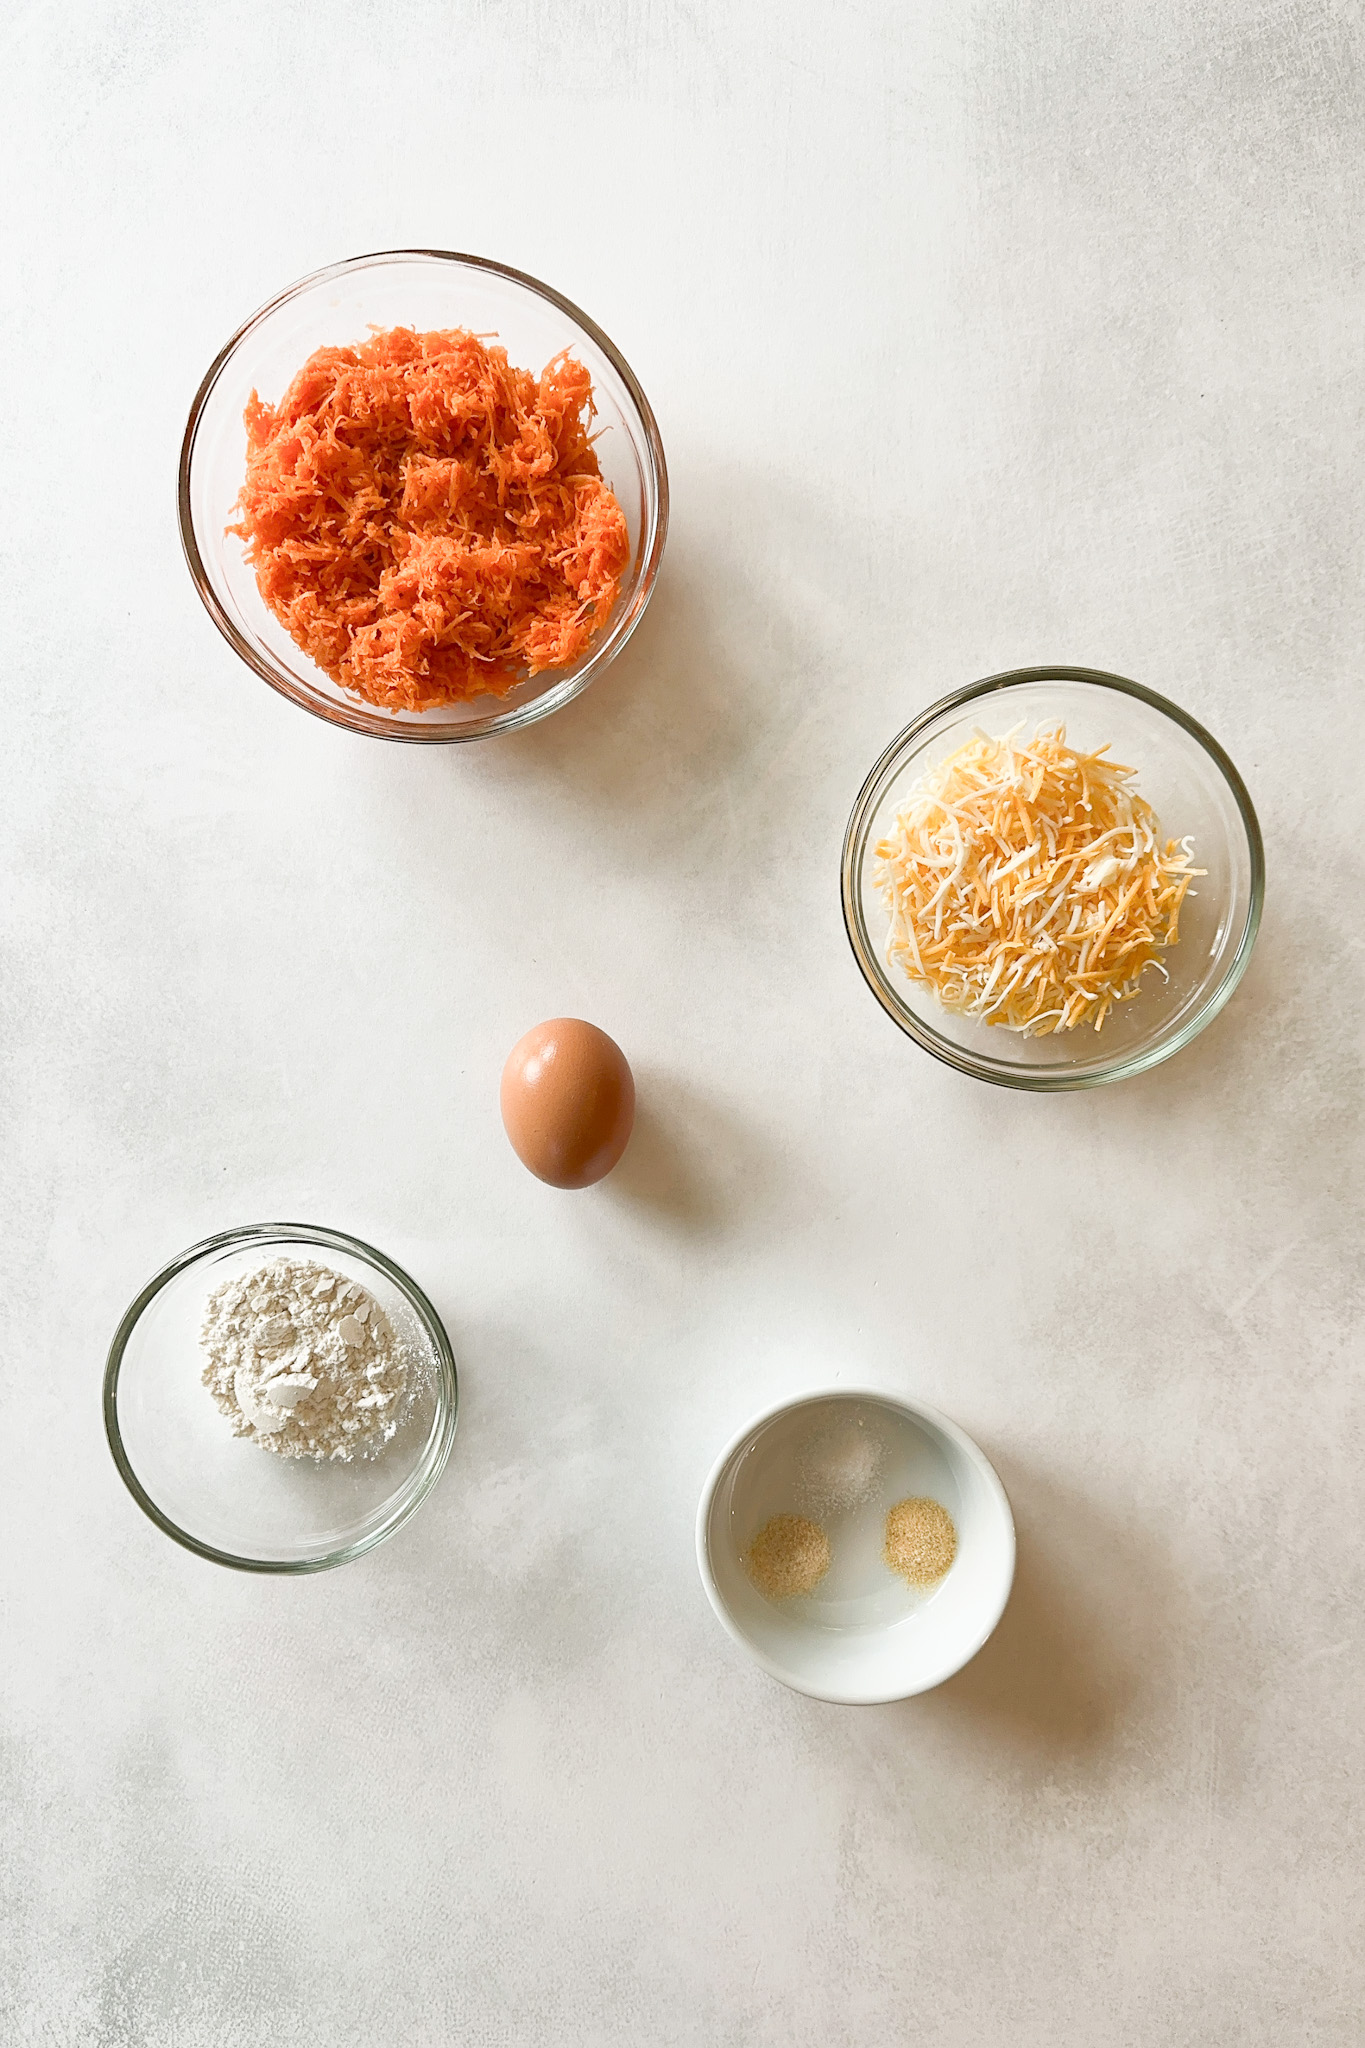 Ingredients to make carrot fritters.